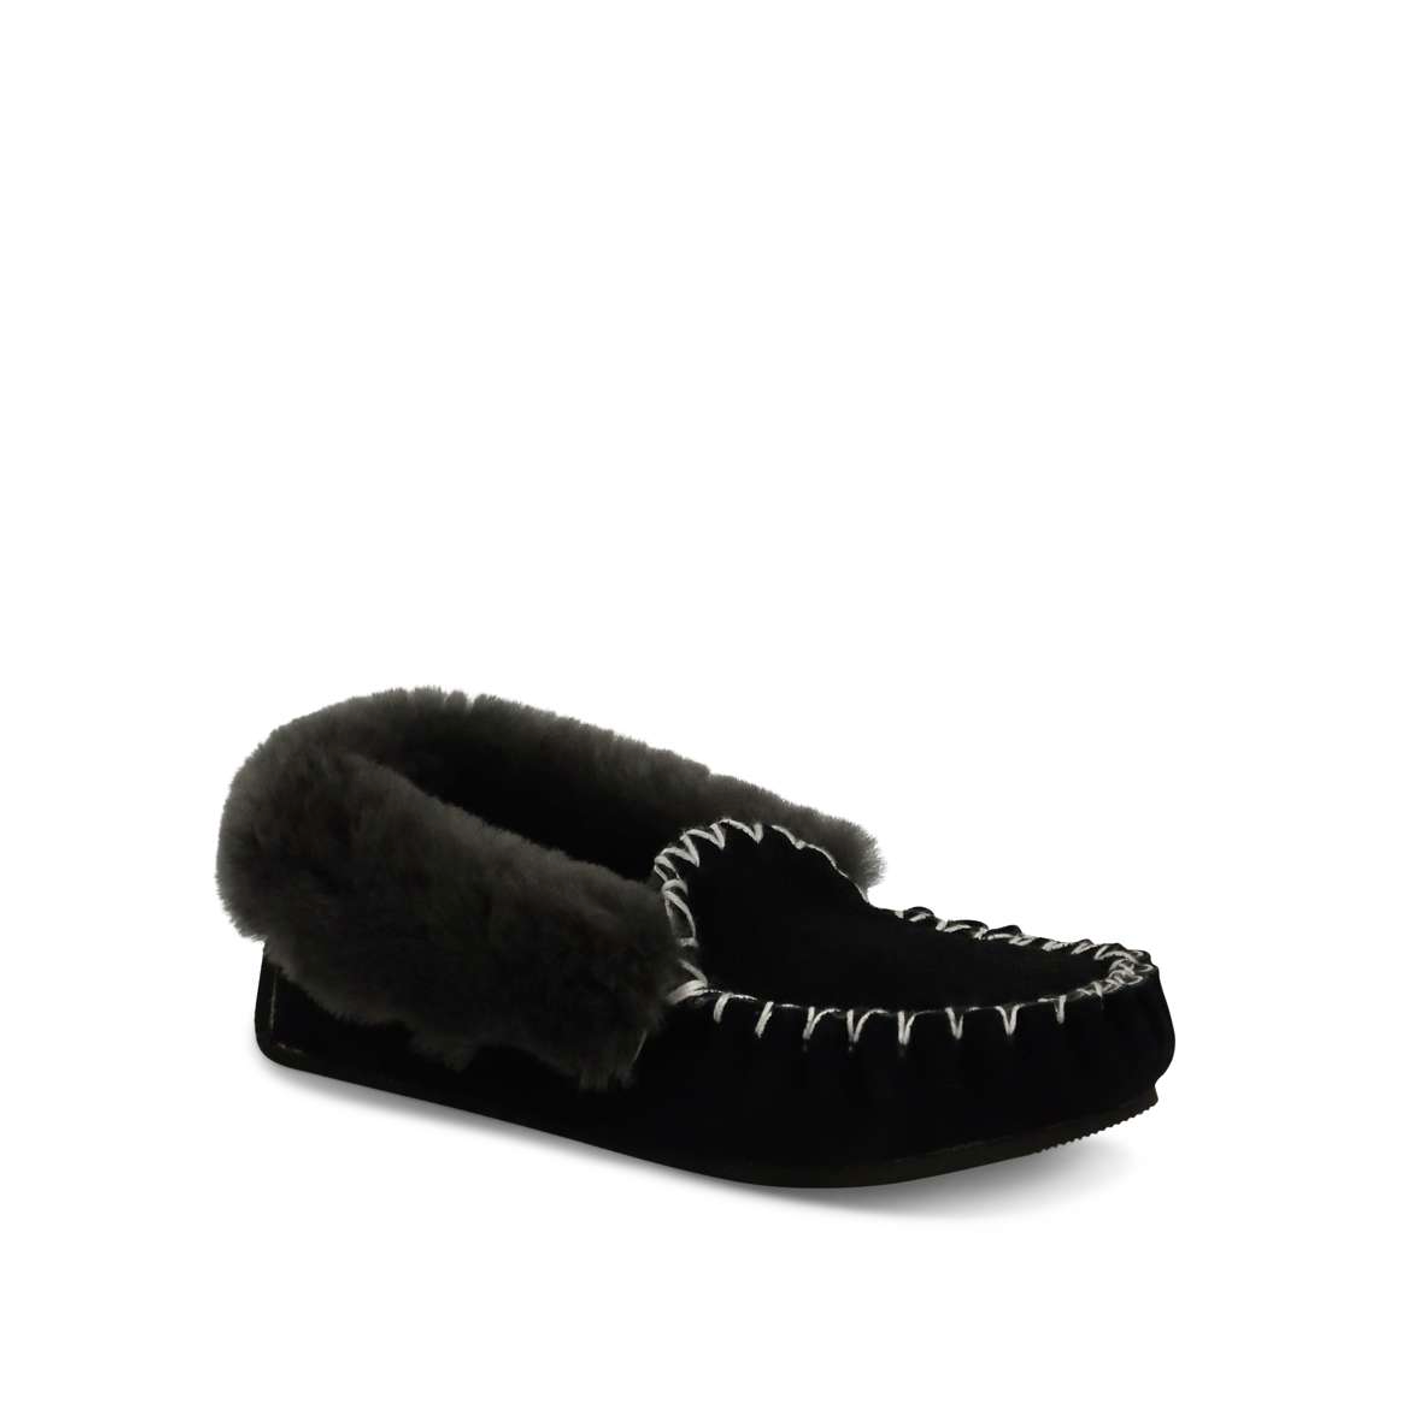 MEN'S TRADITIONAL MOCCASINS - LARGE SIZES